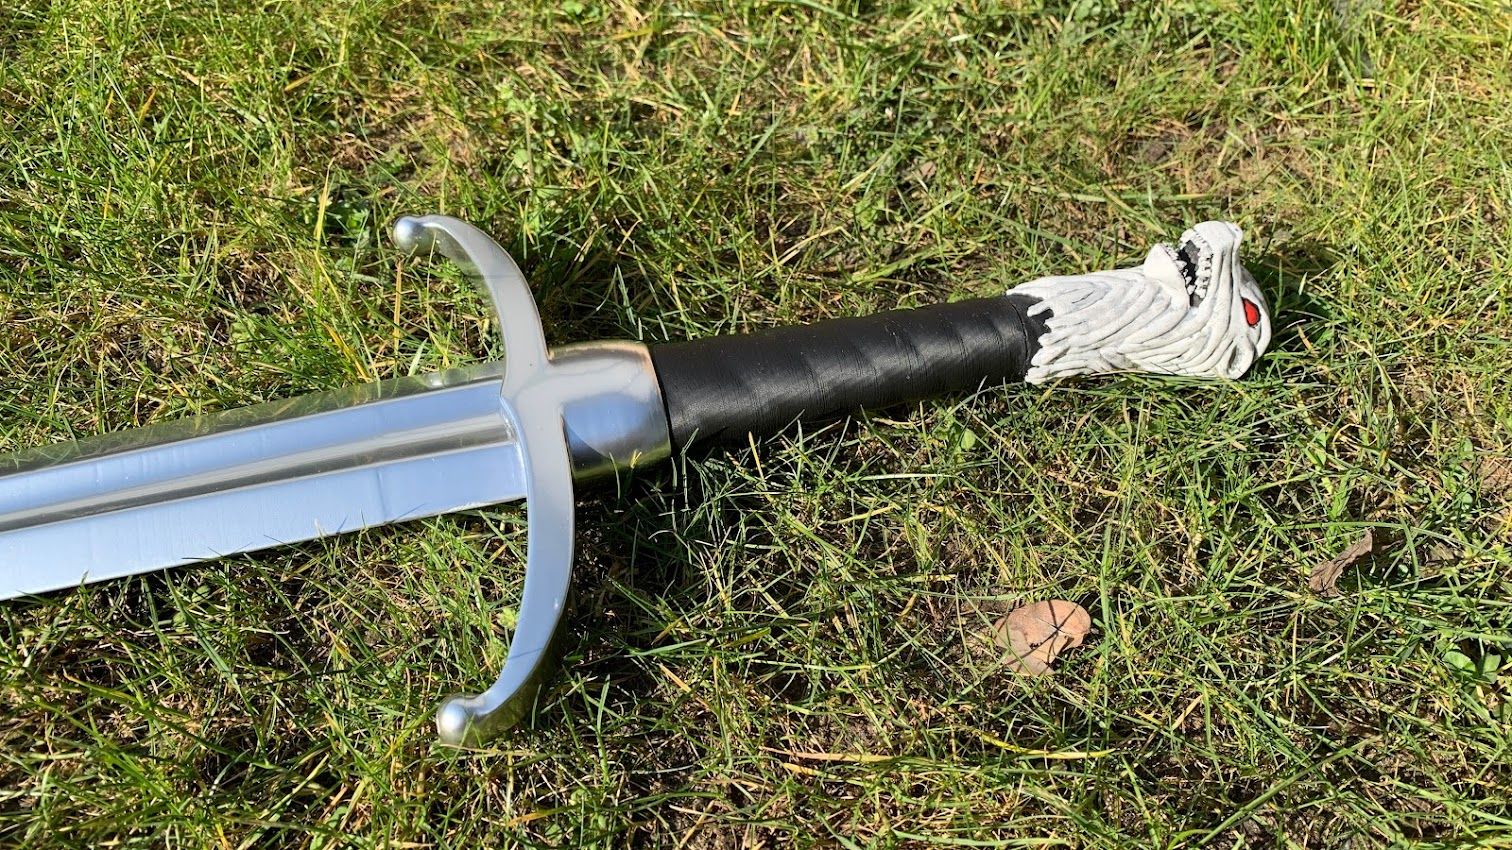 3d Printer Longclaw Sword Jon Snows Sword Of Game Of Thrones • Made With Pla Printer And Resin 